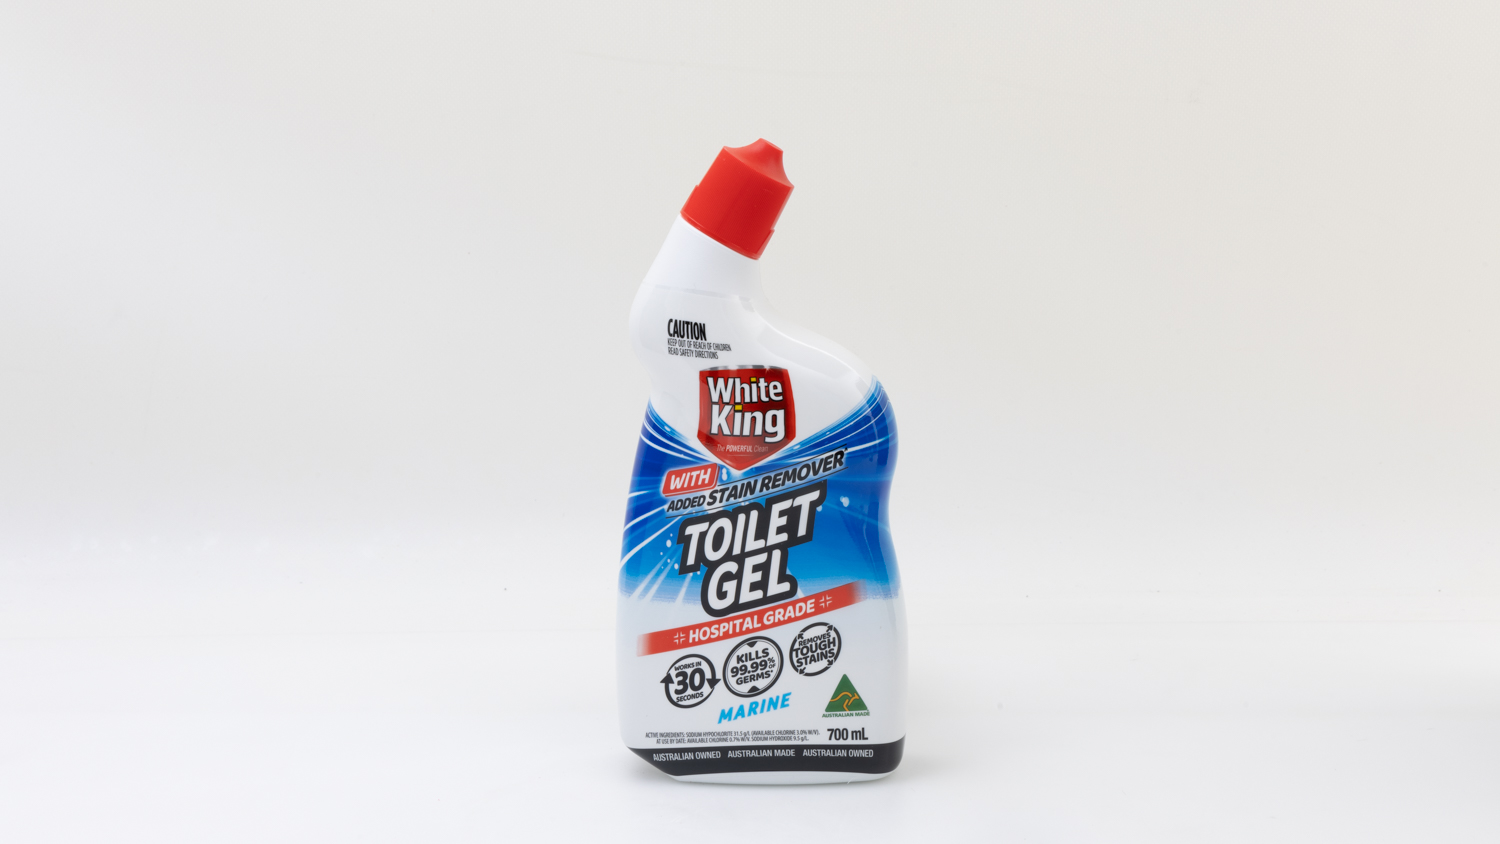 White King Toilet Gel with Added Stain Remover carousel image